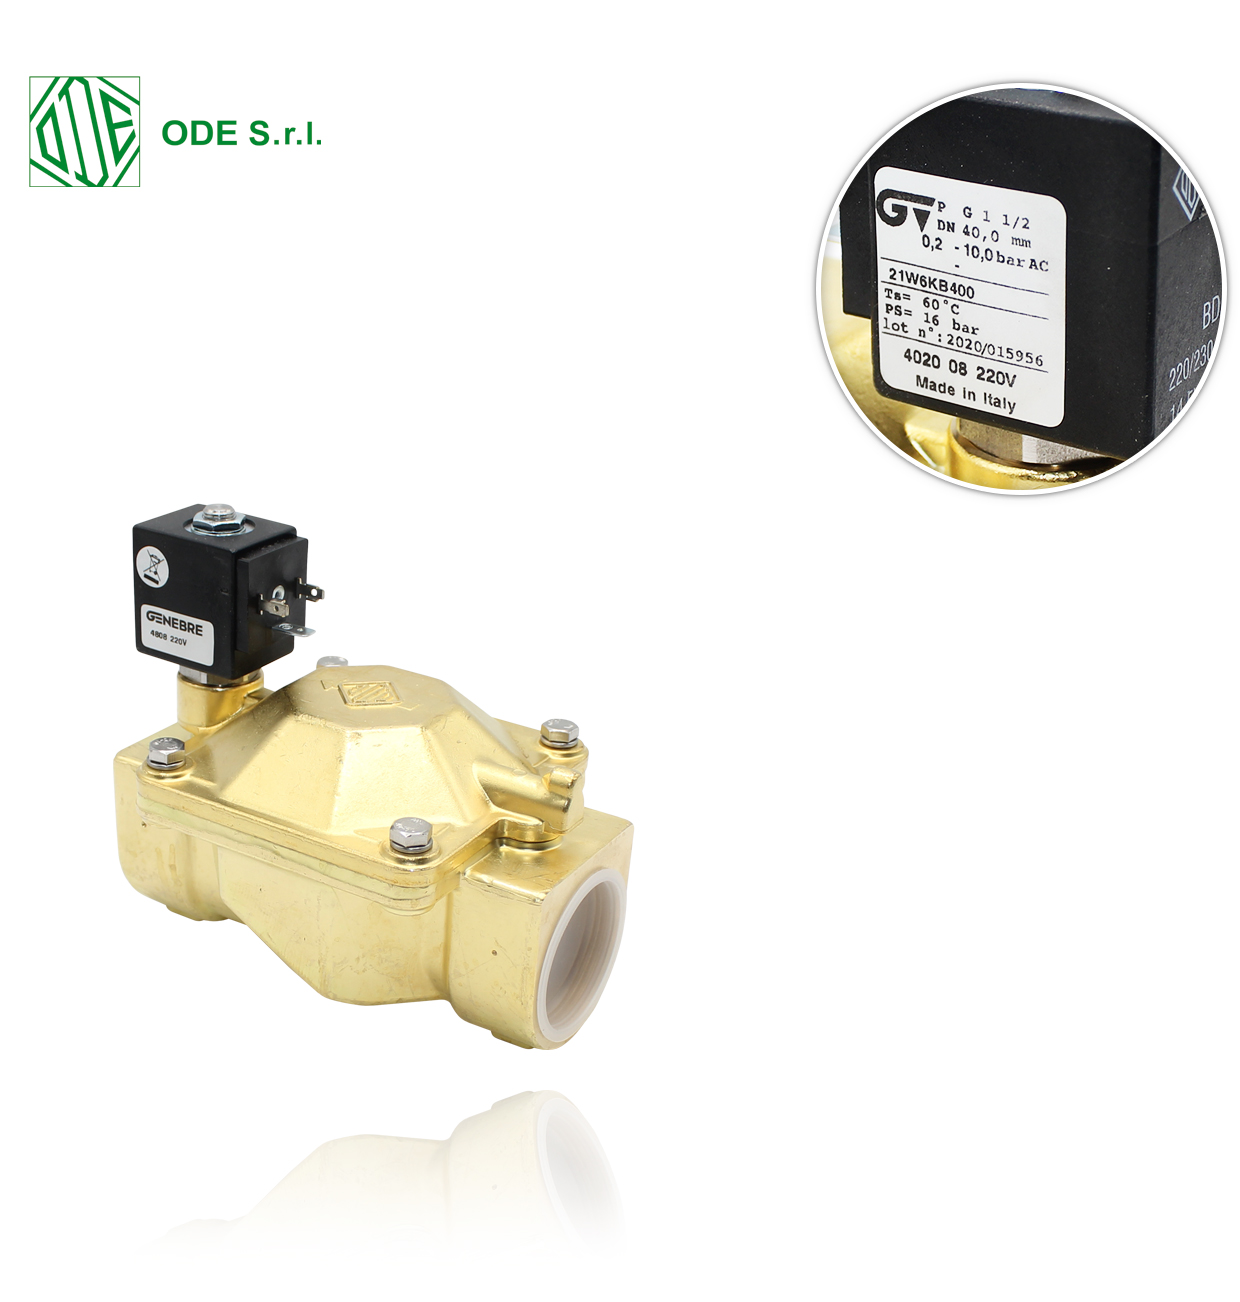 NC R1"1/2 220V/50Hz ODE indirect acting 2-way SOLENOID VALVE for water